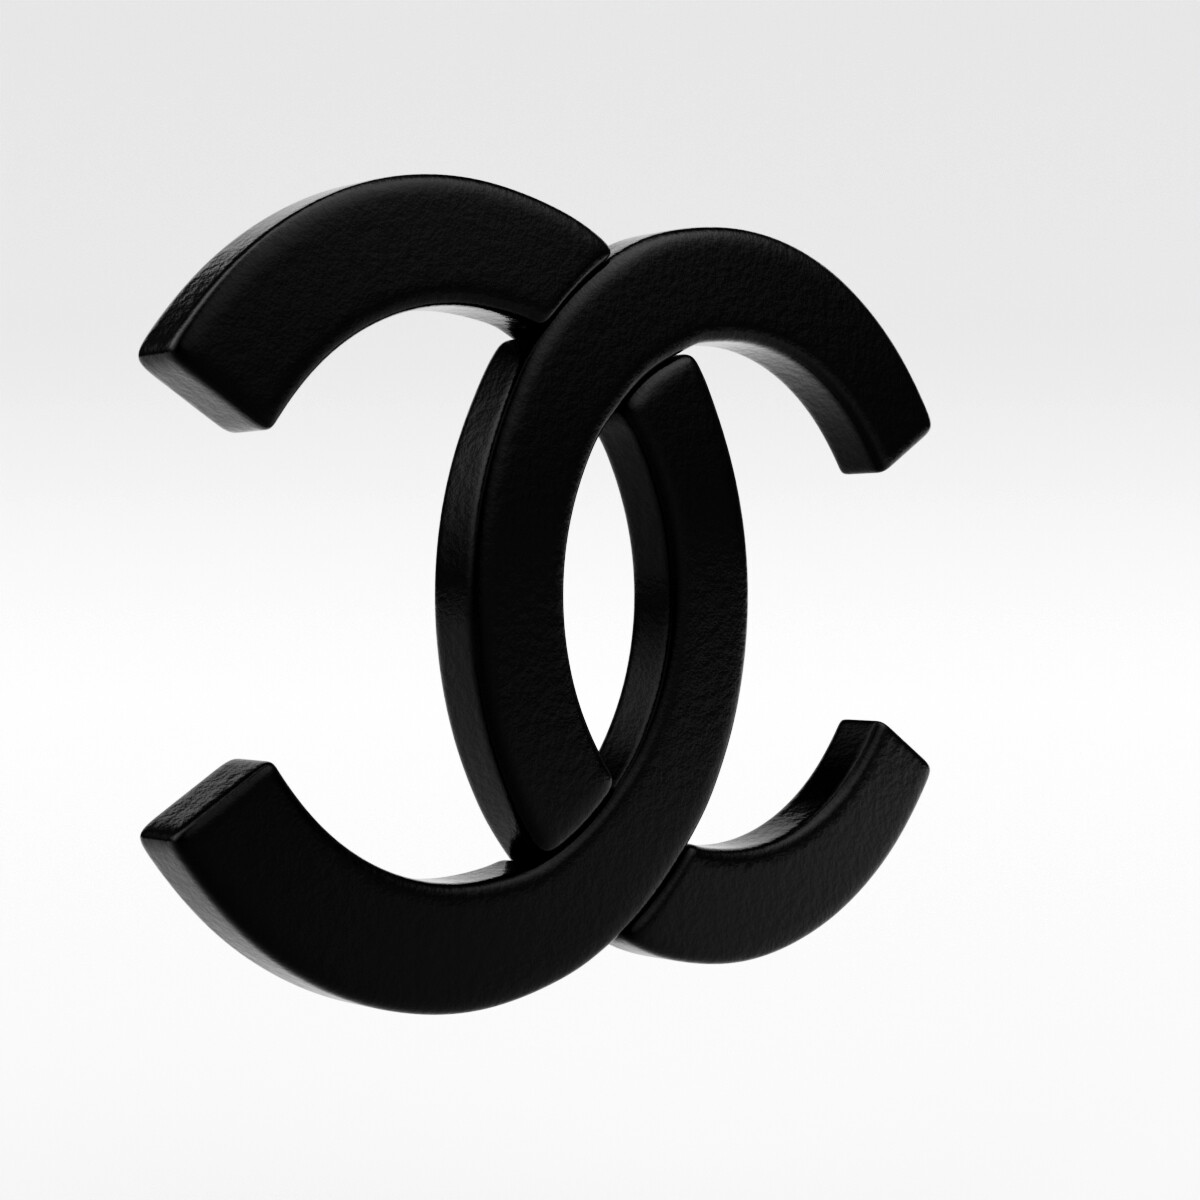 Coco Chanel 3D Gold Logo transparent PNG  StickPNG